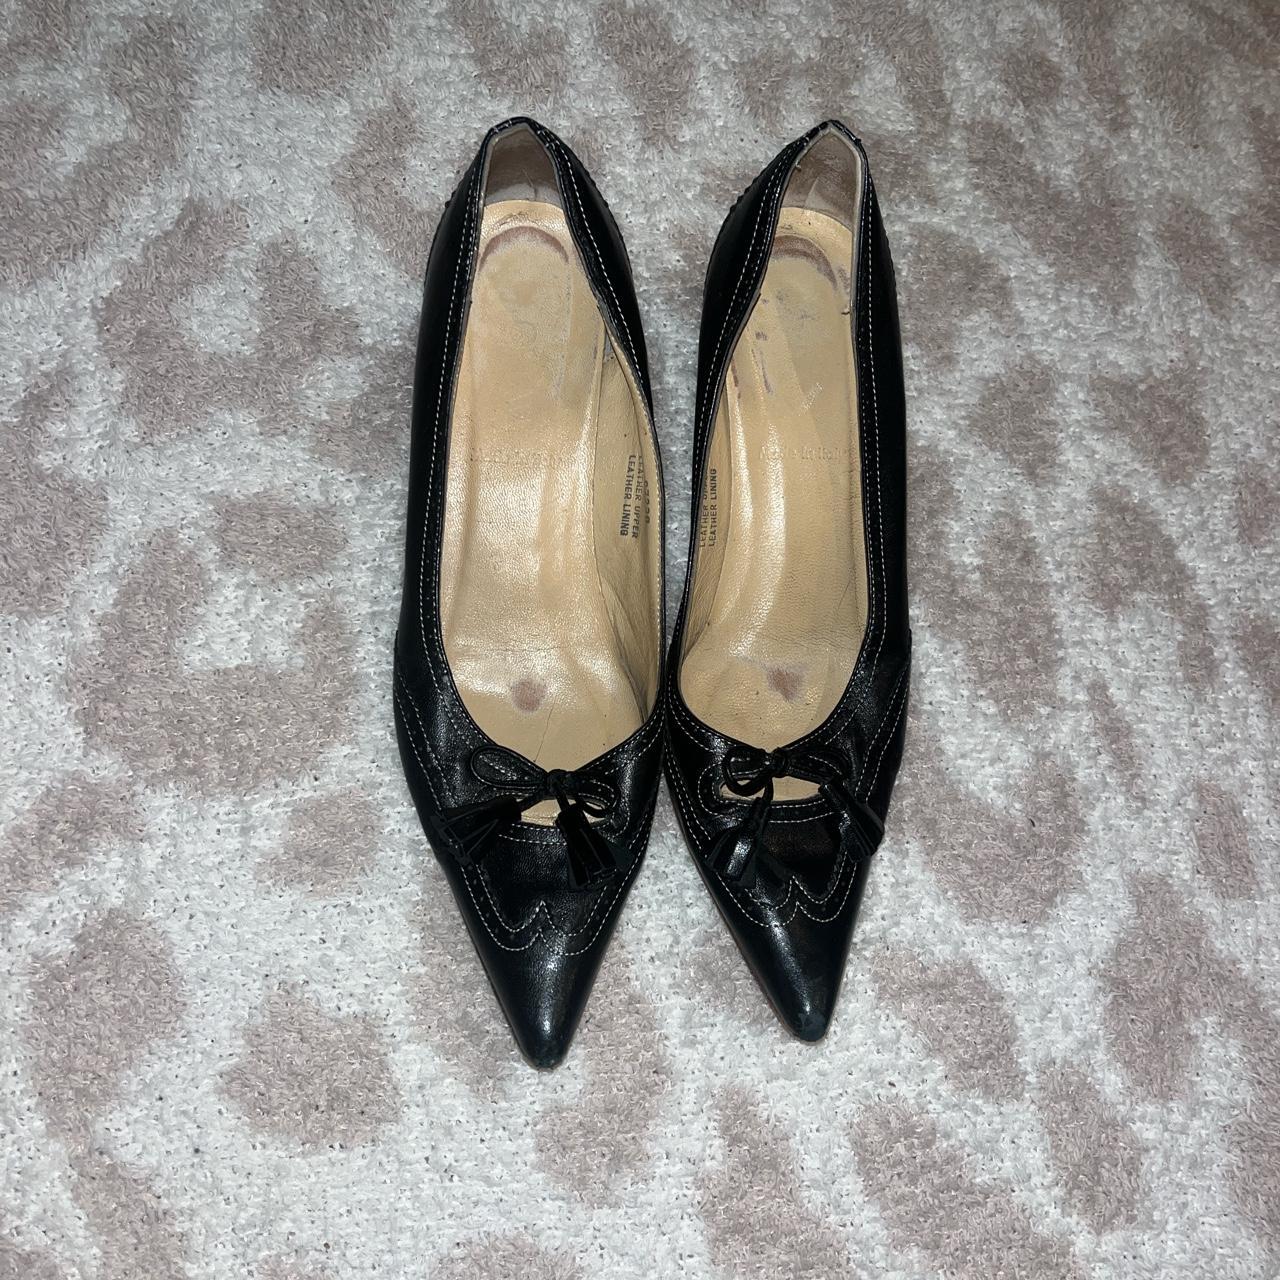 J. Crew pointed toe leather kitten heels with bows - Depop